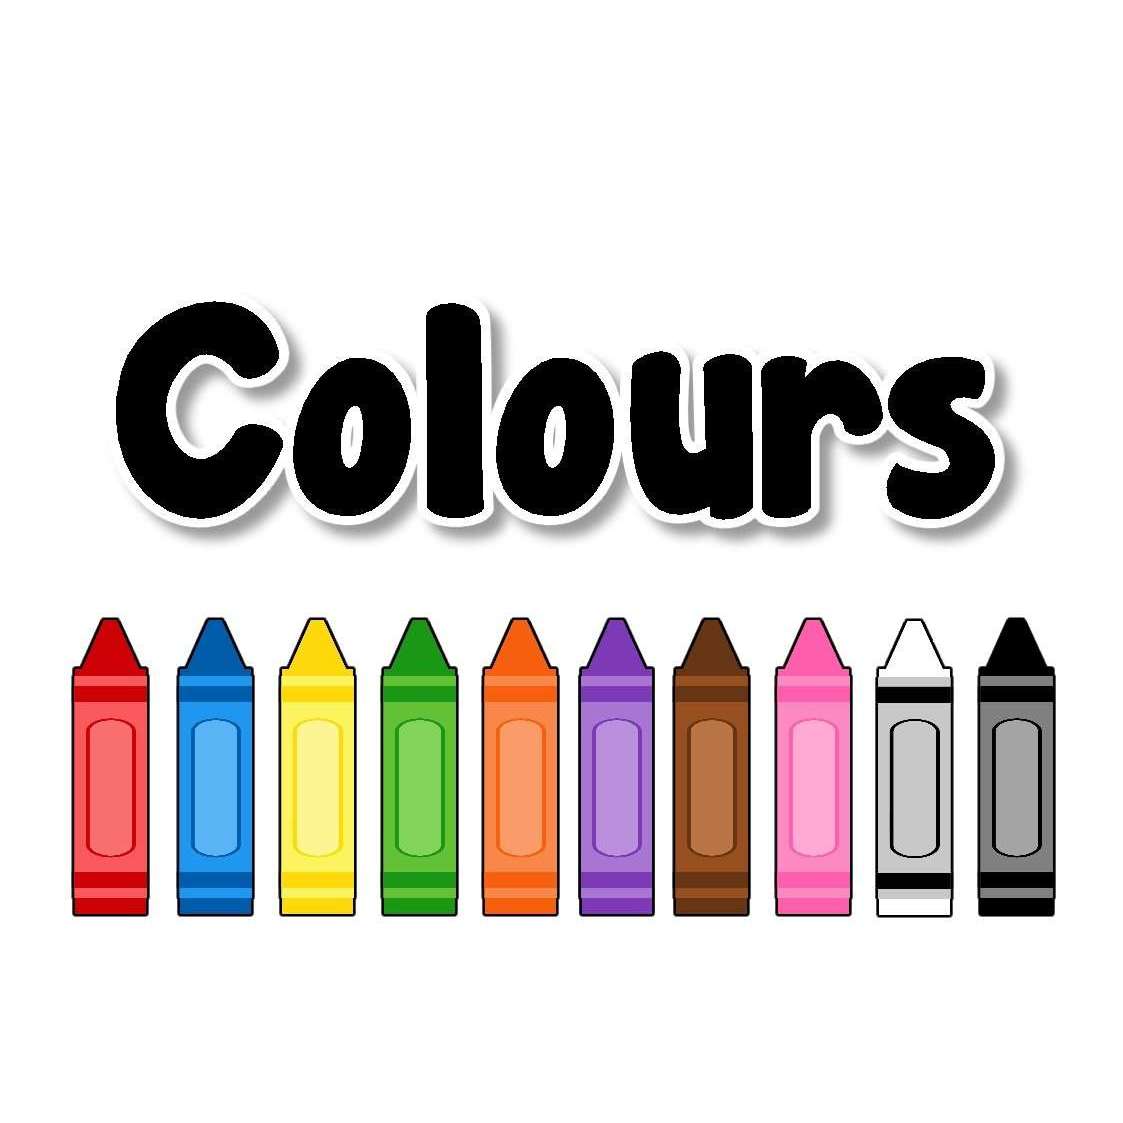 Coloured Crayons Display Pack:Primary Classroom Resources